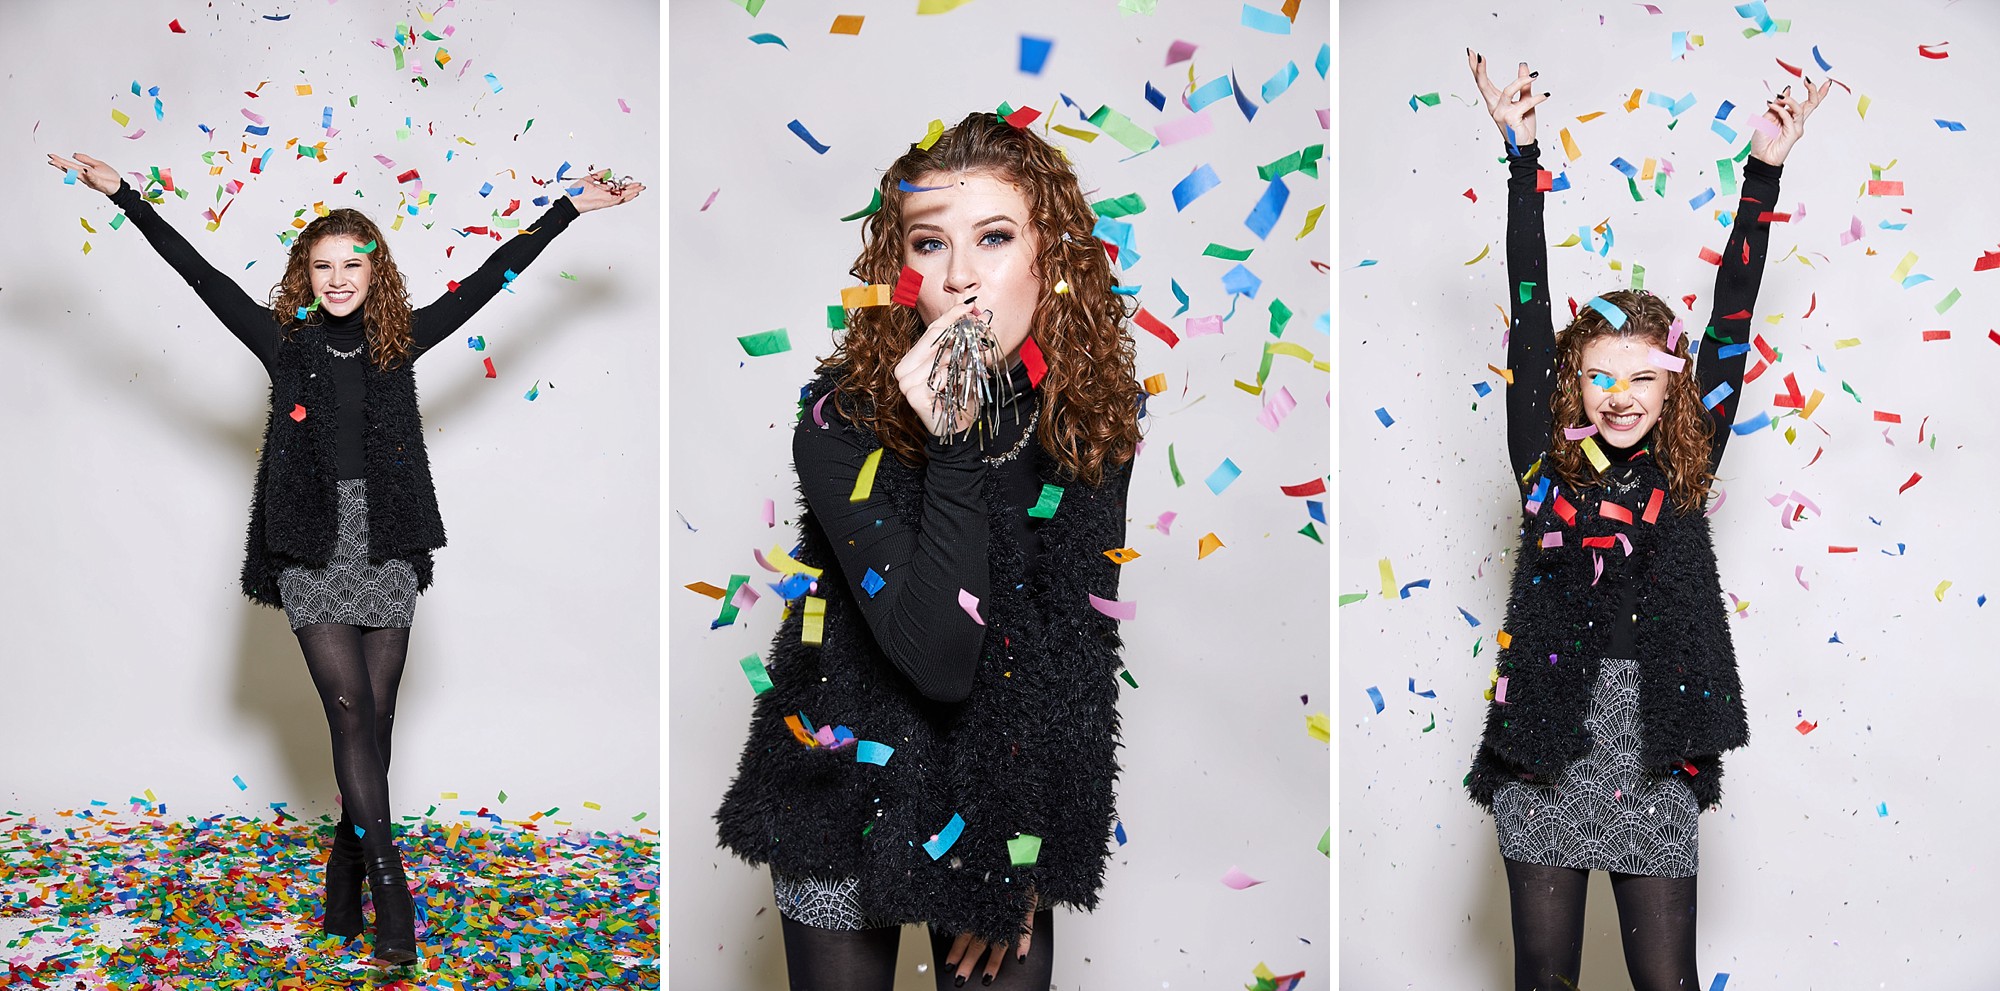 Fun New Years photo shoot with confetti